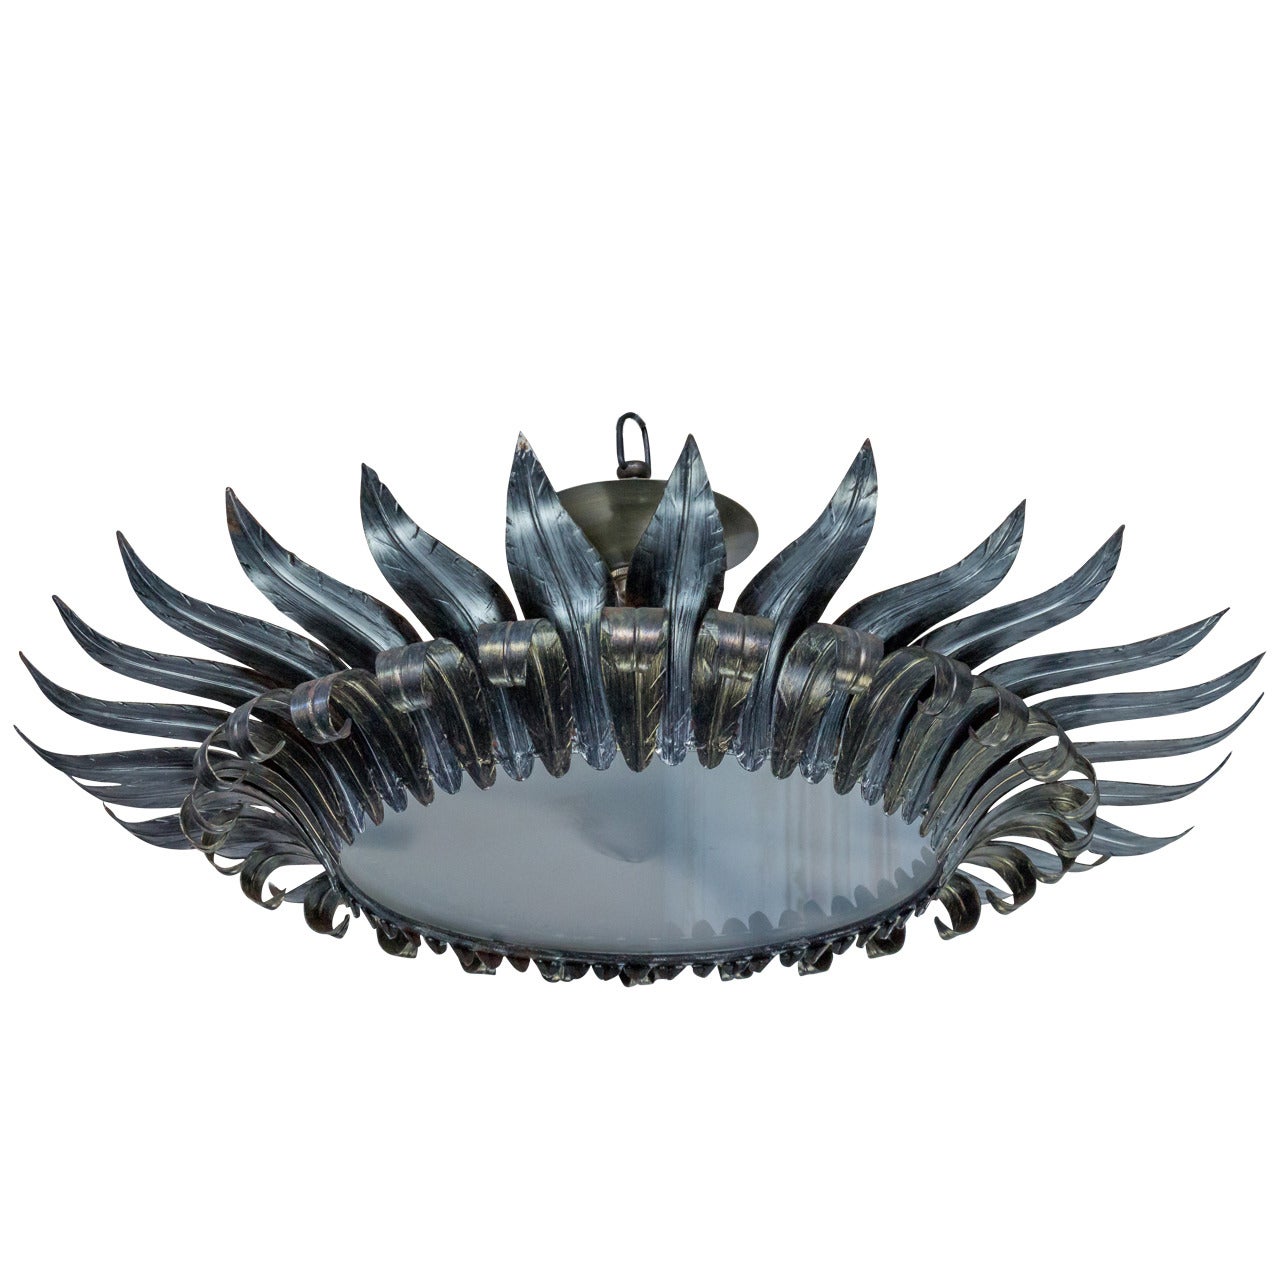 Handsome Spanish Silver and Gold Ceiling Sunburst Fixture